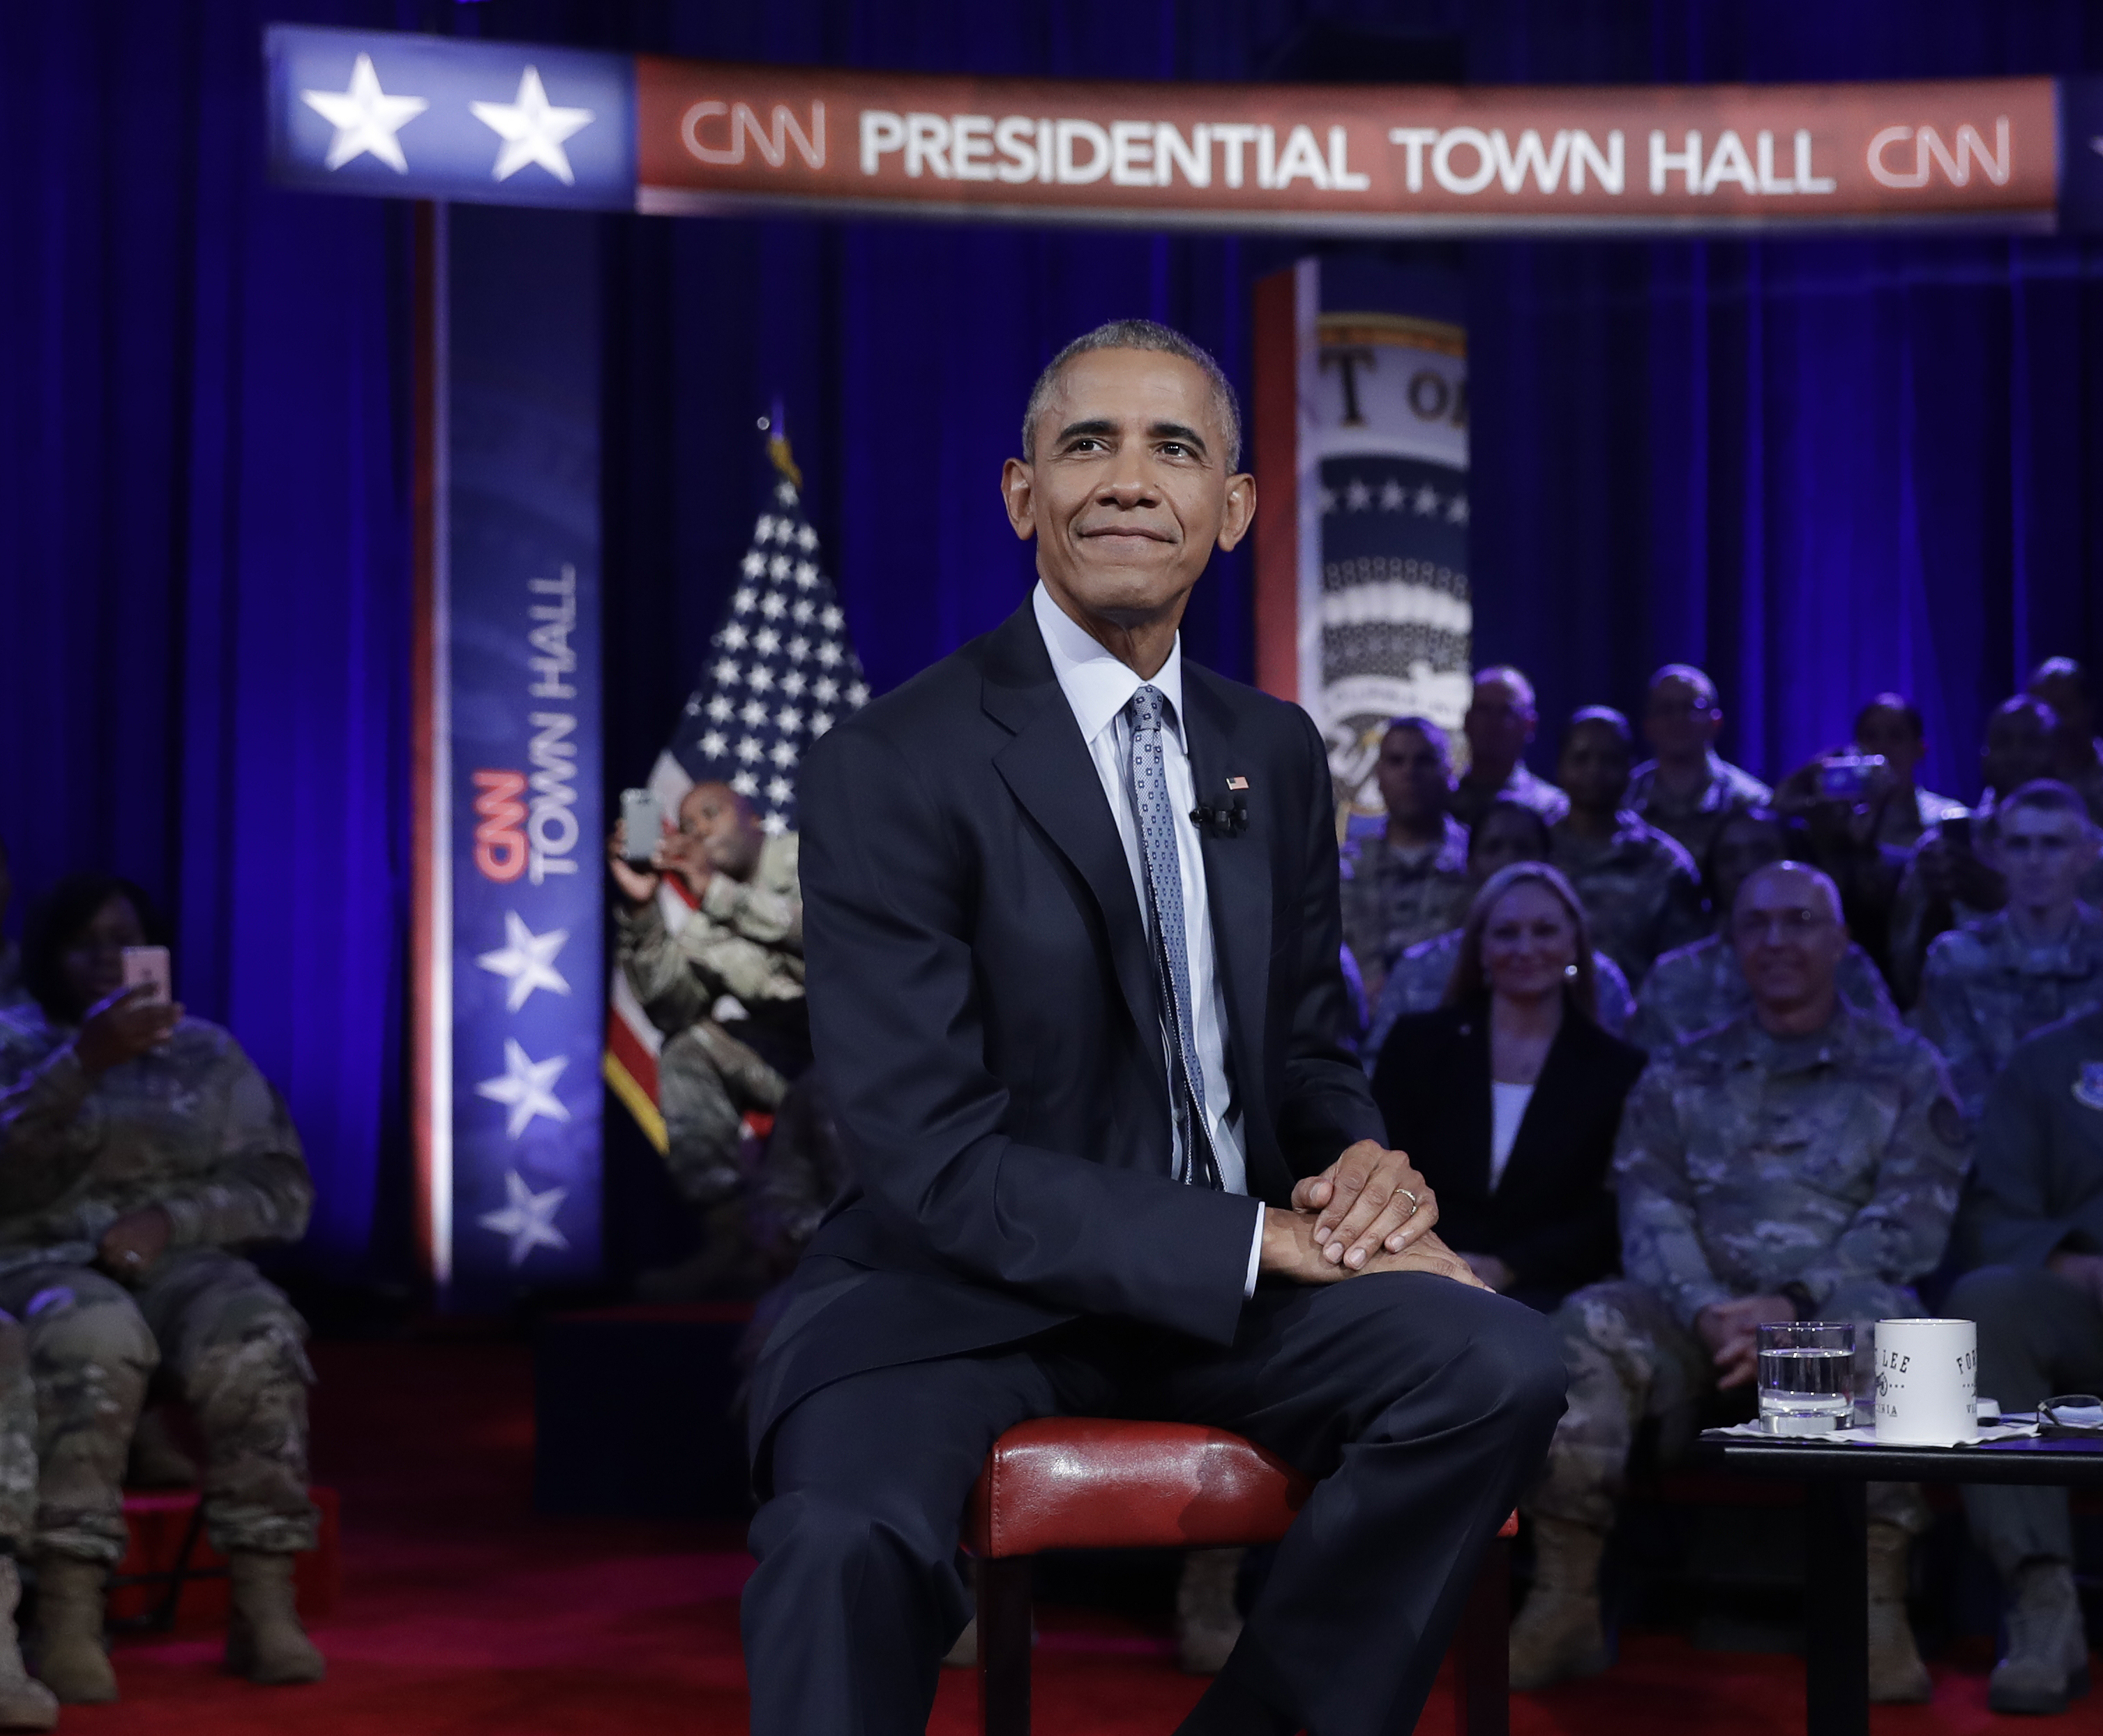 President Barack Obama pauses during a break in taping of a CNN town hall meeting with CNN news anchor Jake Tapper, Wednesday, Sept. 28, 2016, in Fort Lee, Va., with members of the military community. (AP Photo/Carolyn Kaster)